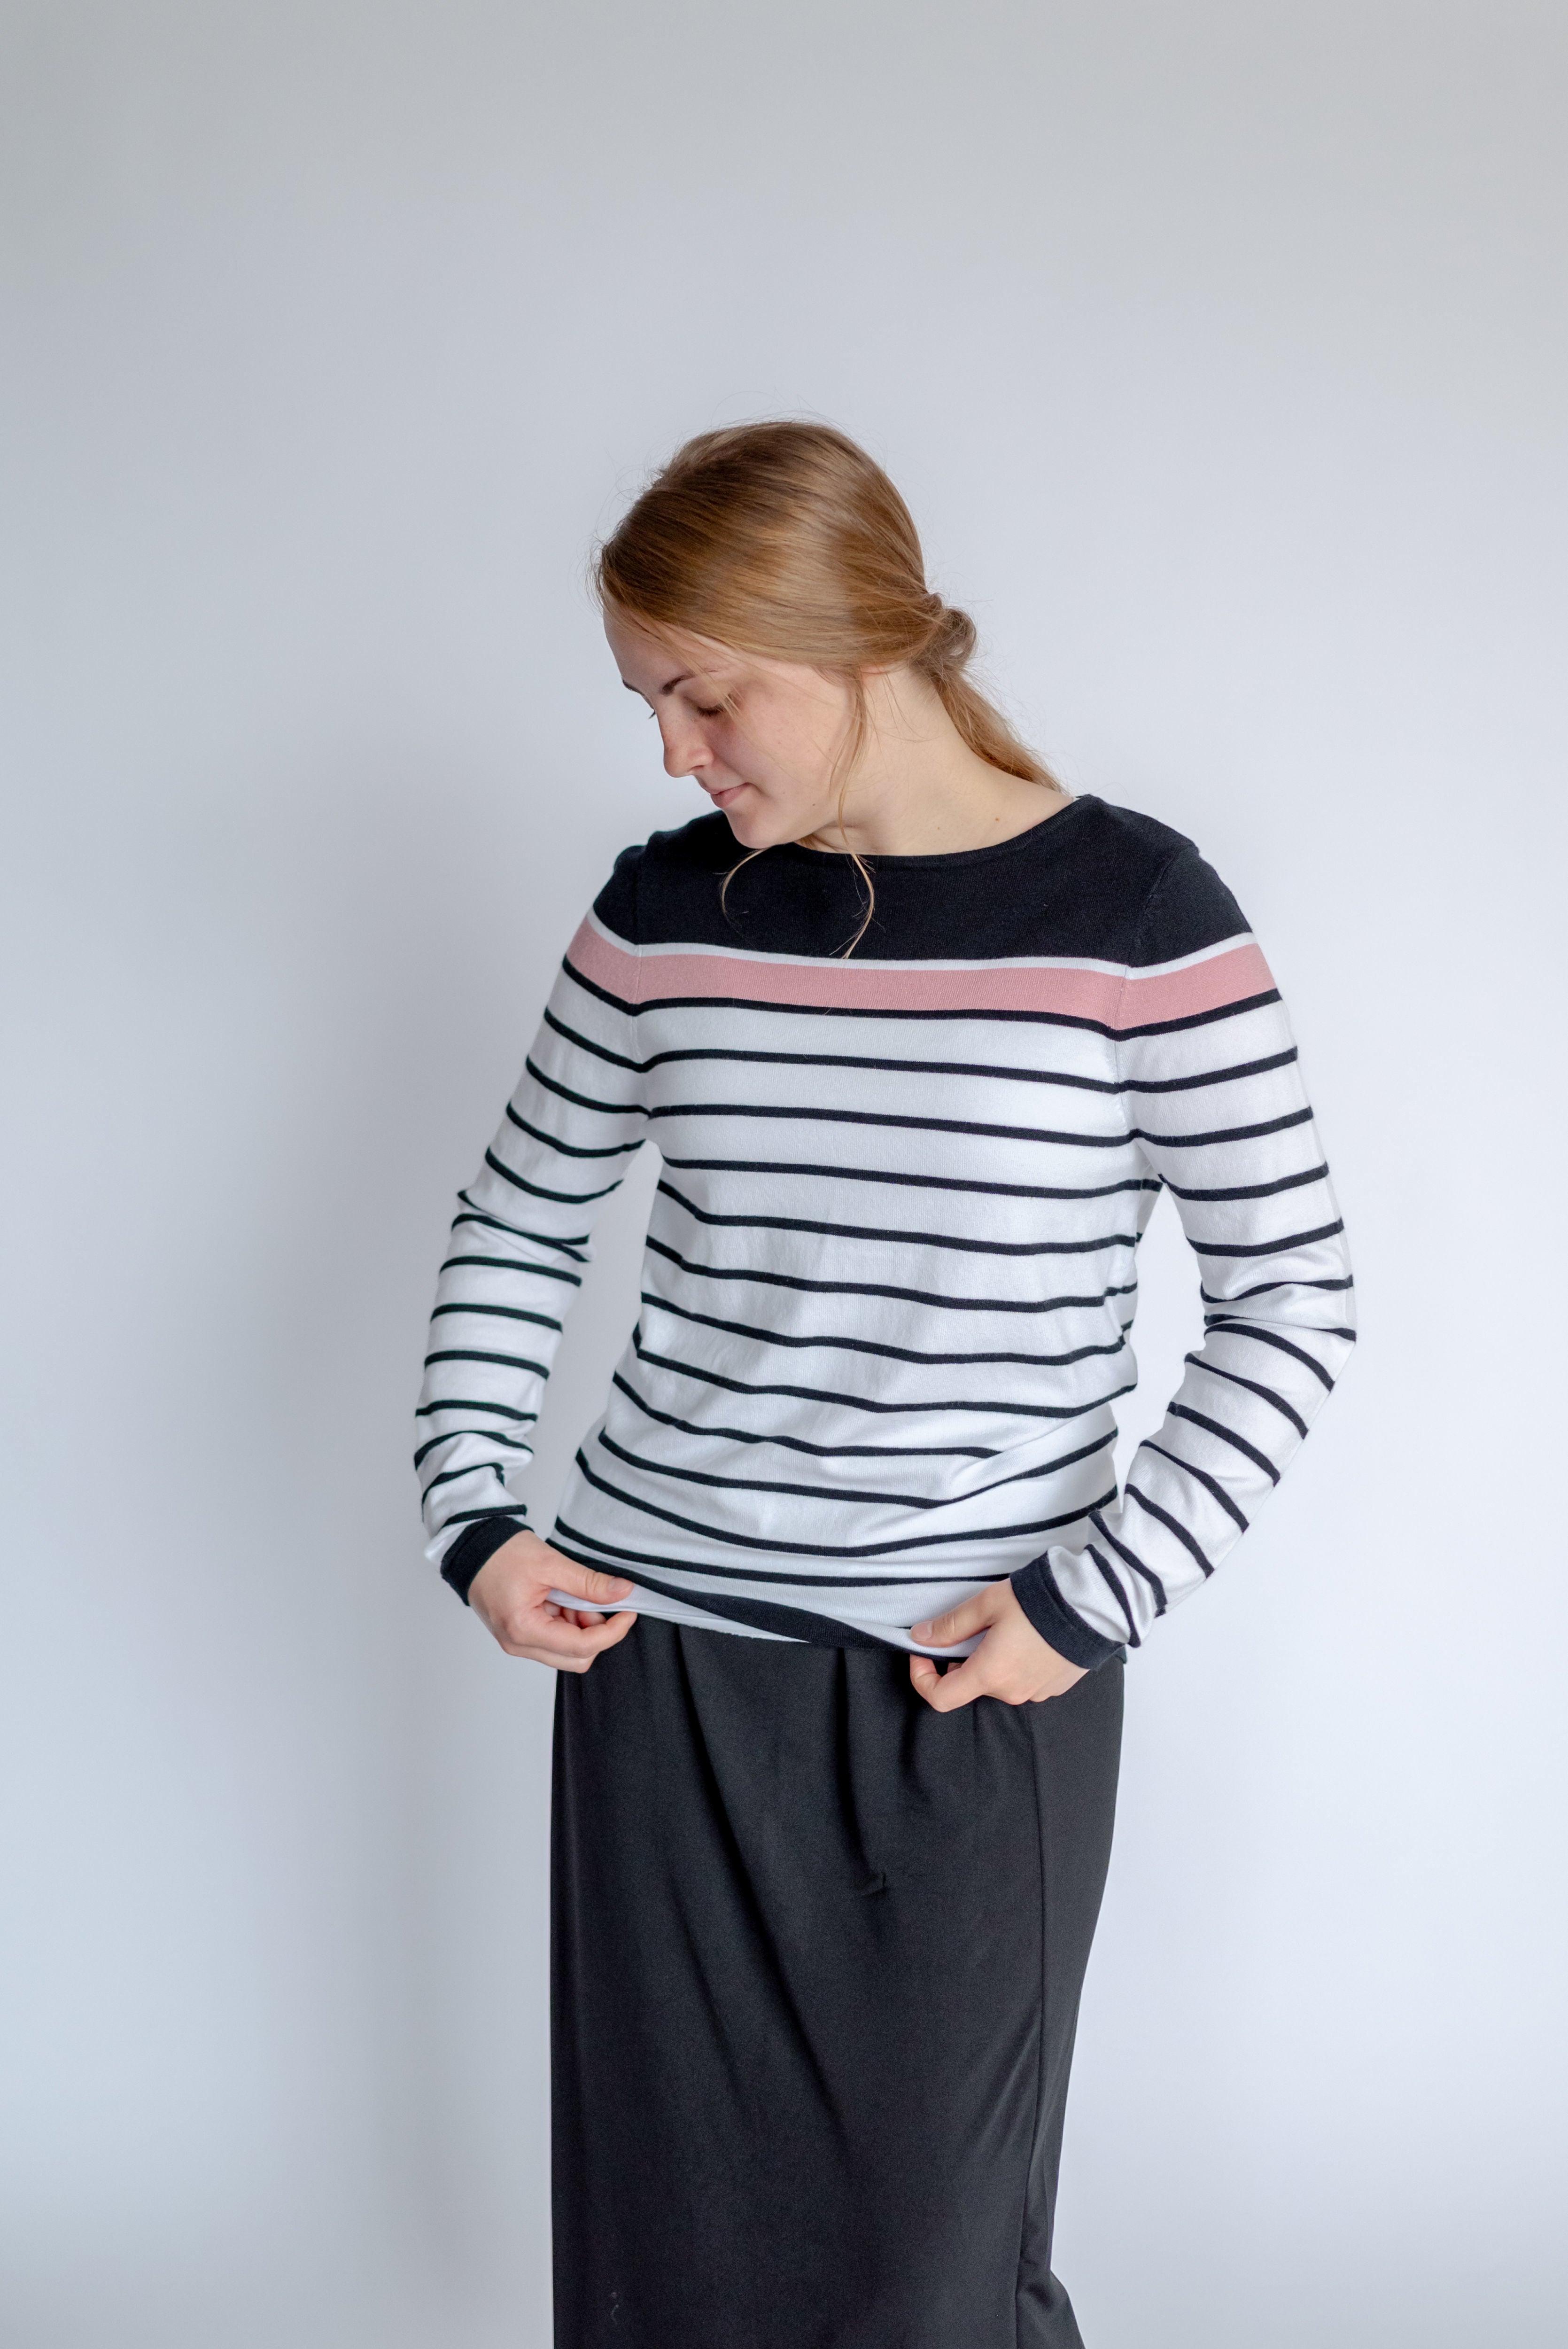 Kimberly Striped Sweater in Ivory and Rose - Kimberly Striped Sweater in Ivory and Rose - undefined - Salt and Honey